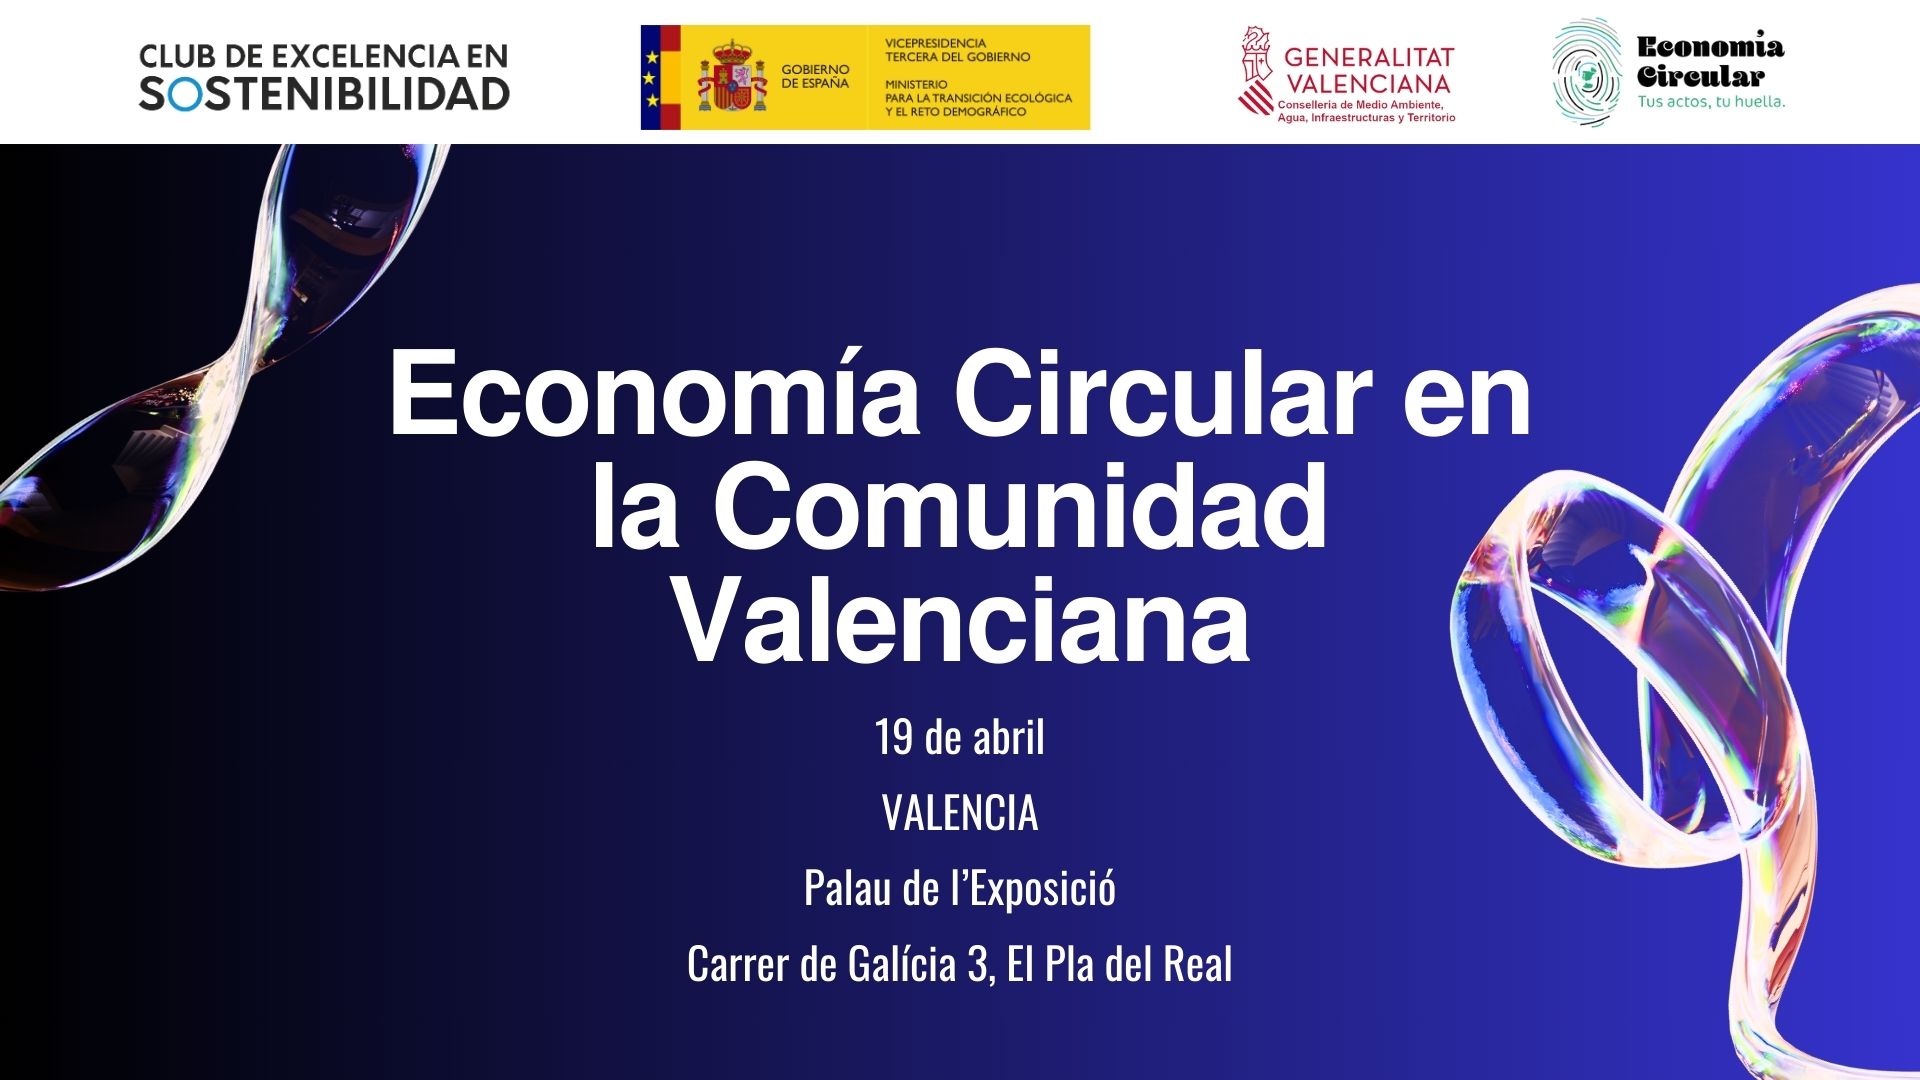 SAVE THE DATE VALENCIA